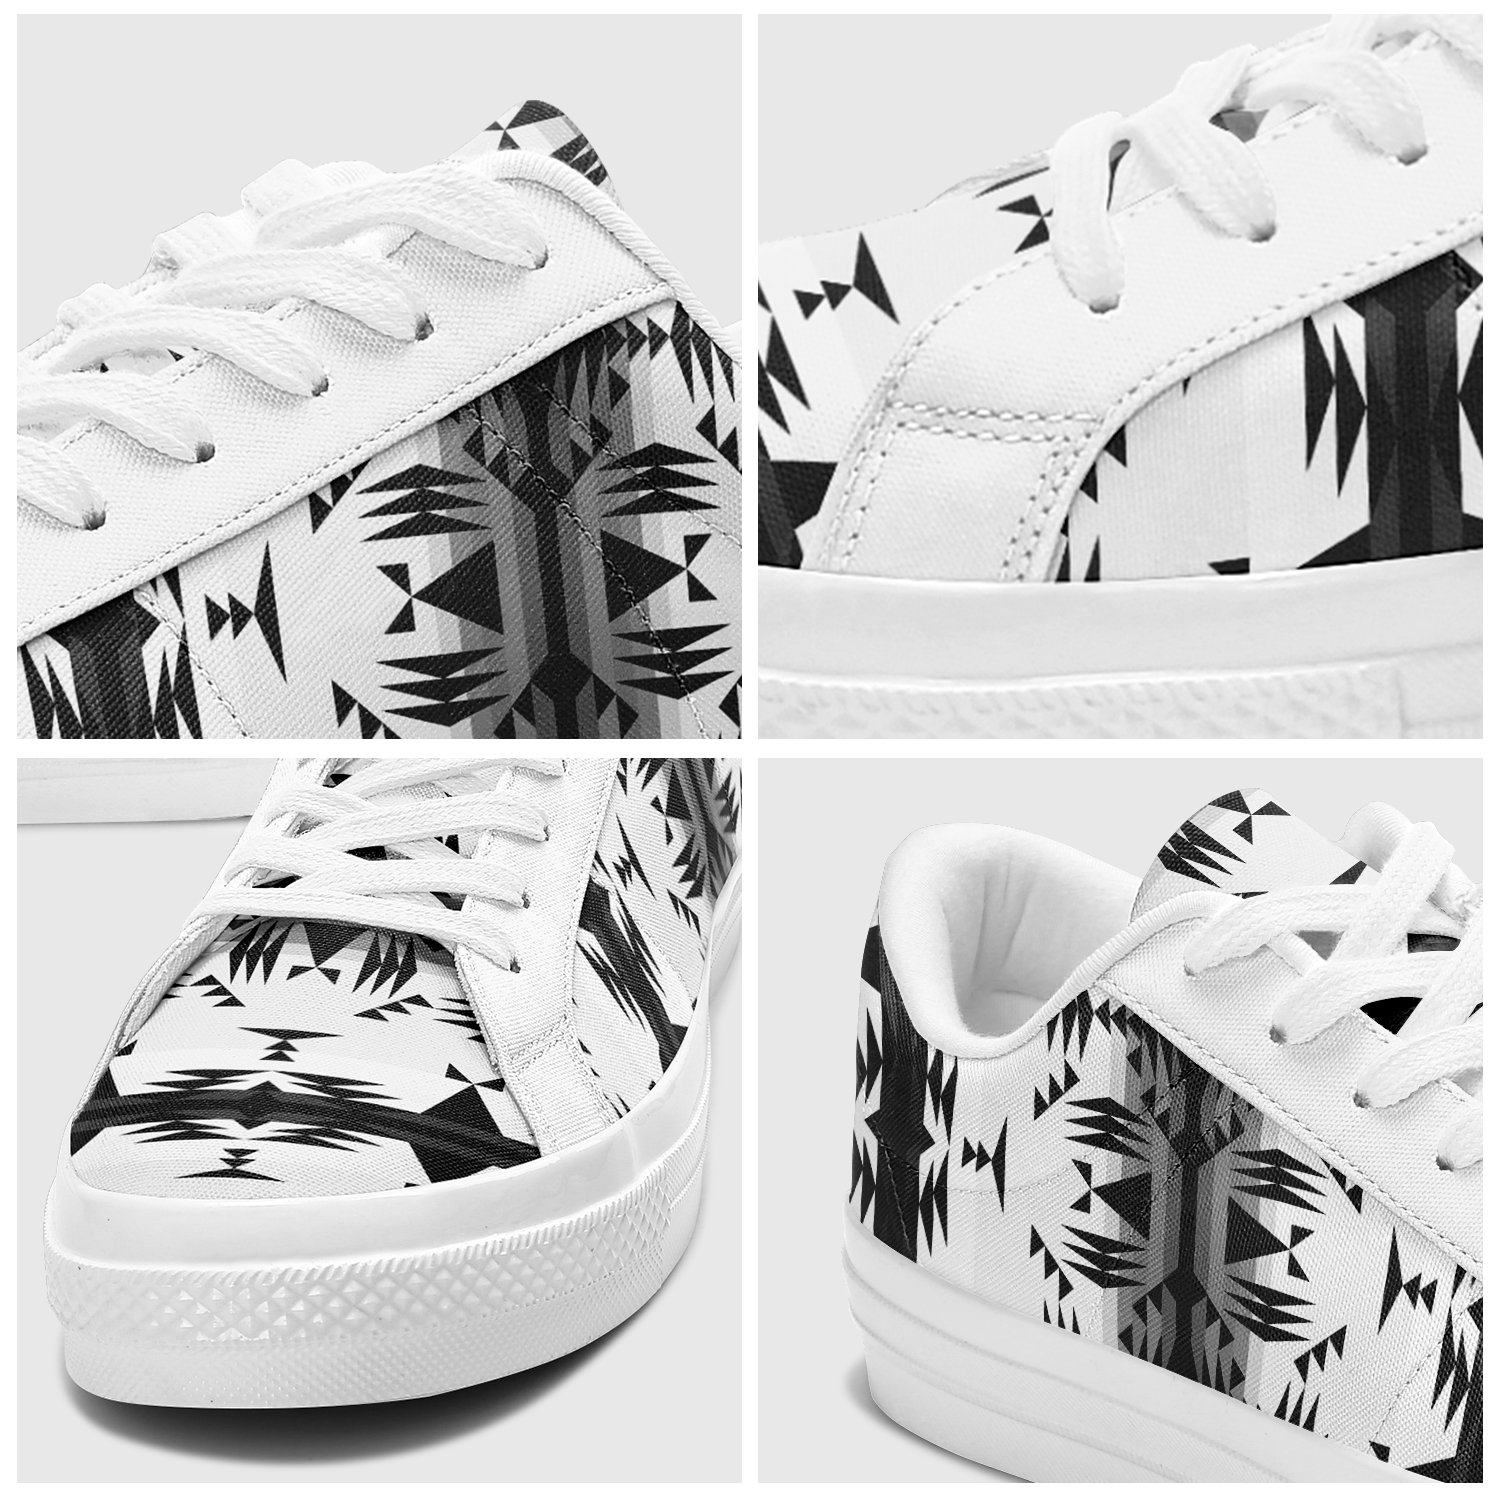 Between the Mountains White and Black Aapisi Low Top Canvas Shoes White Sole 49 Dzine 